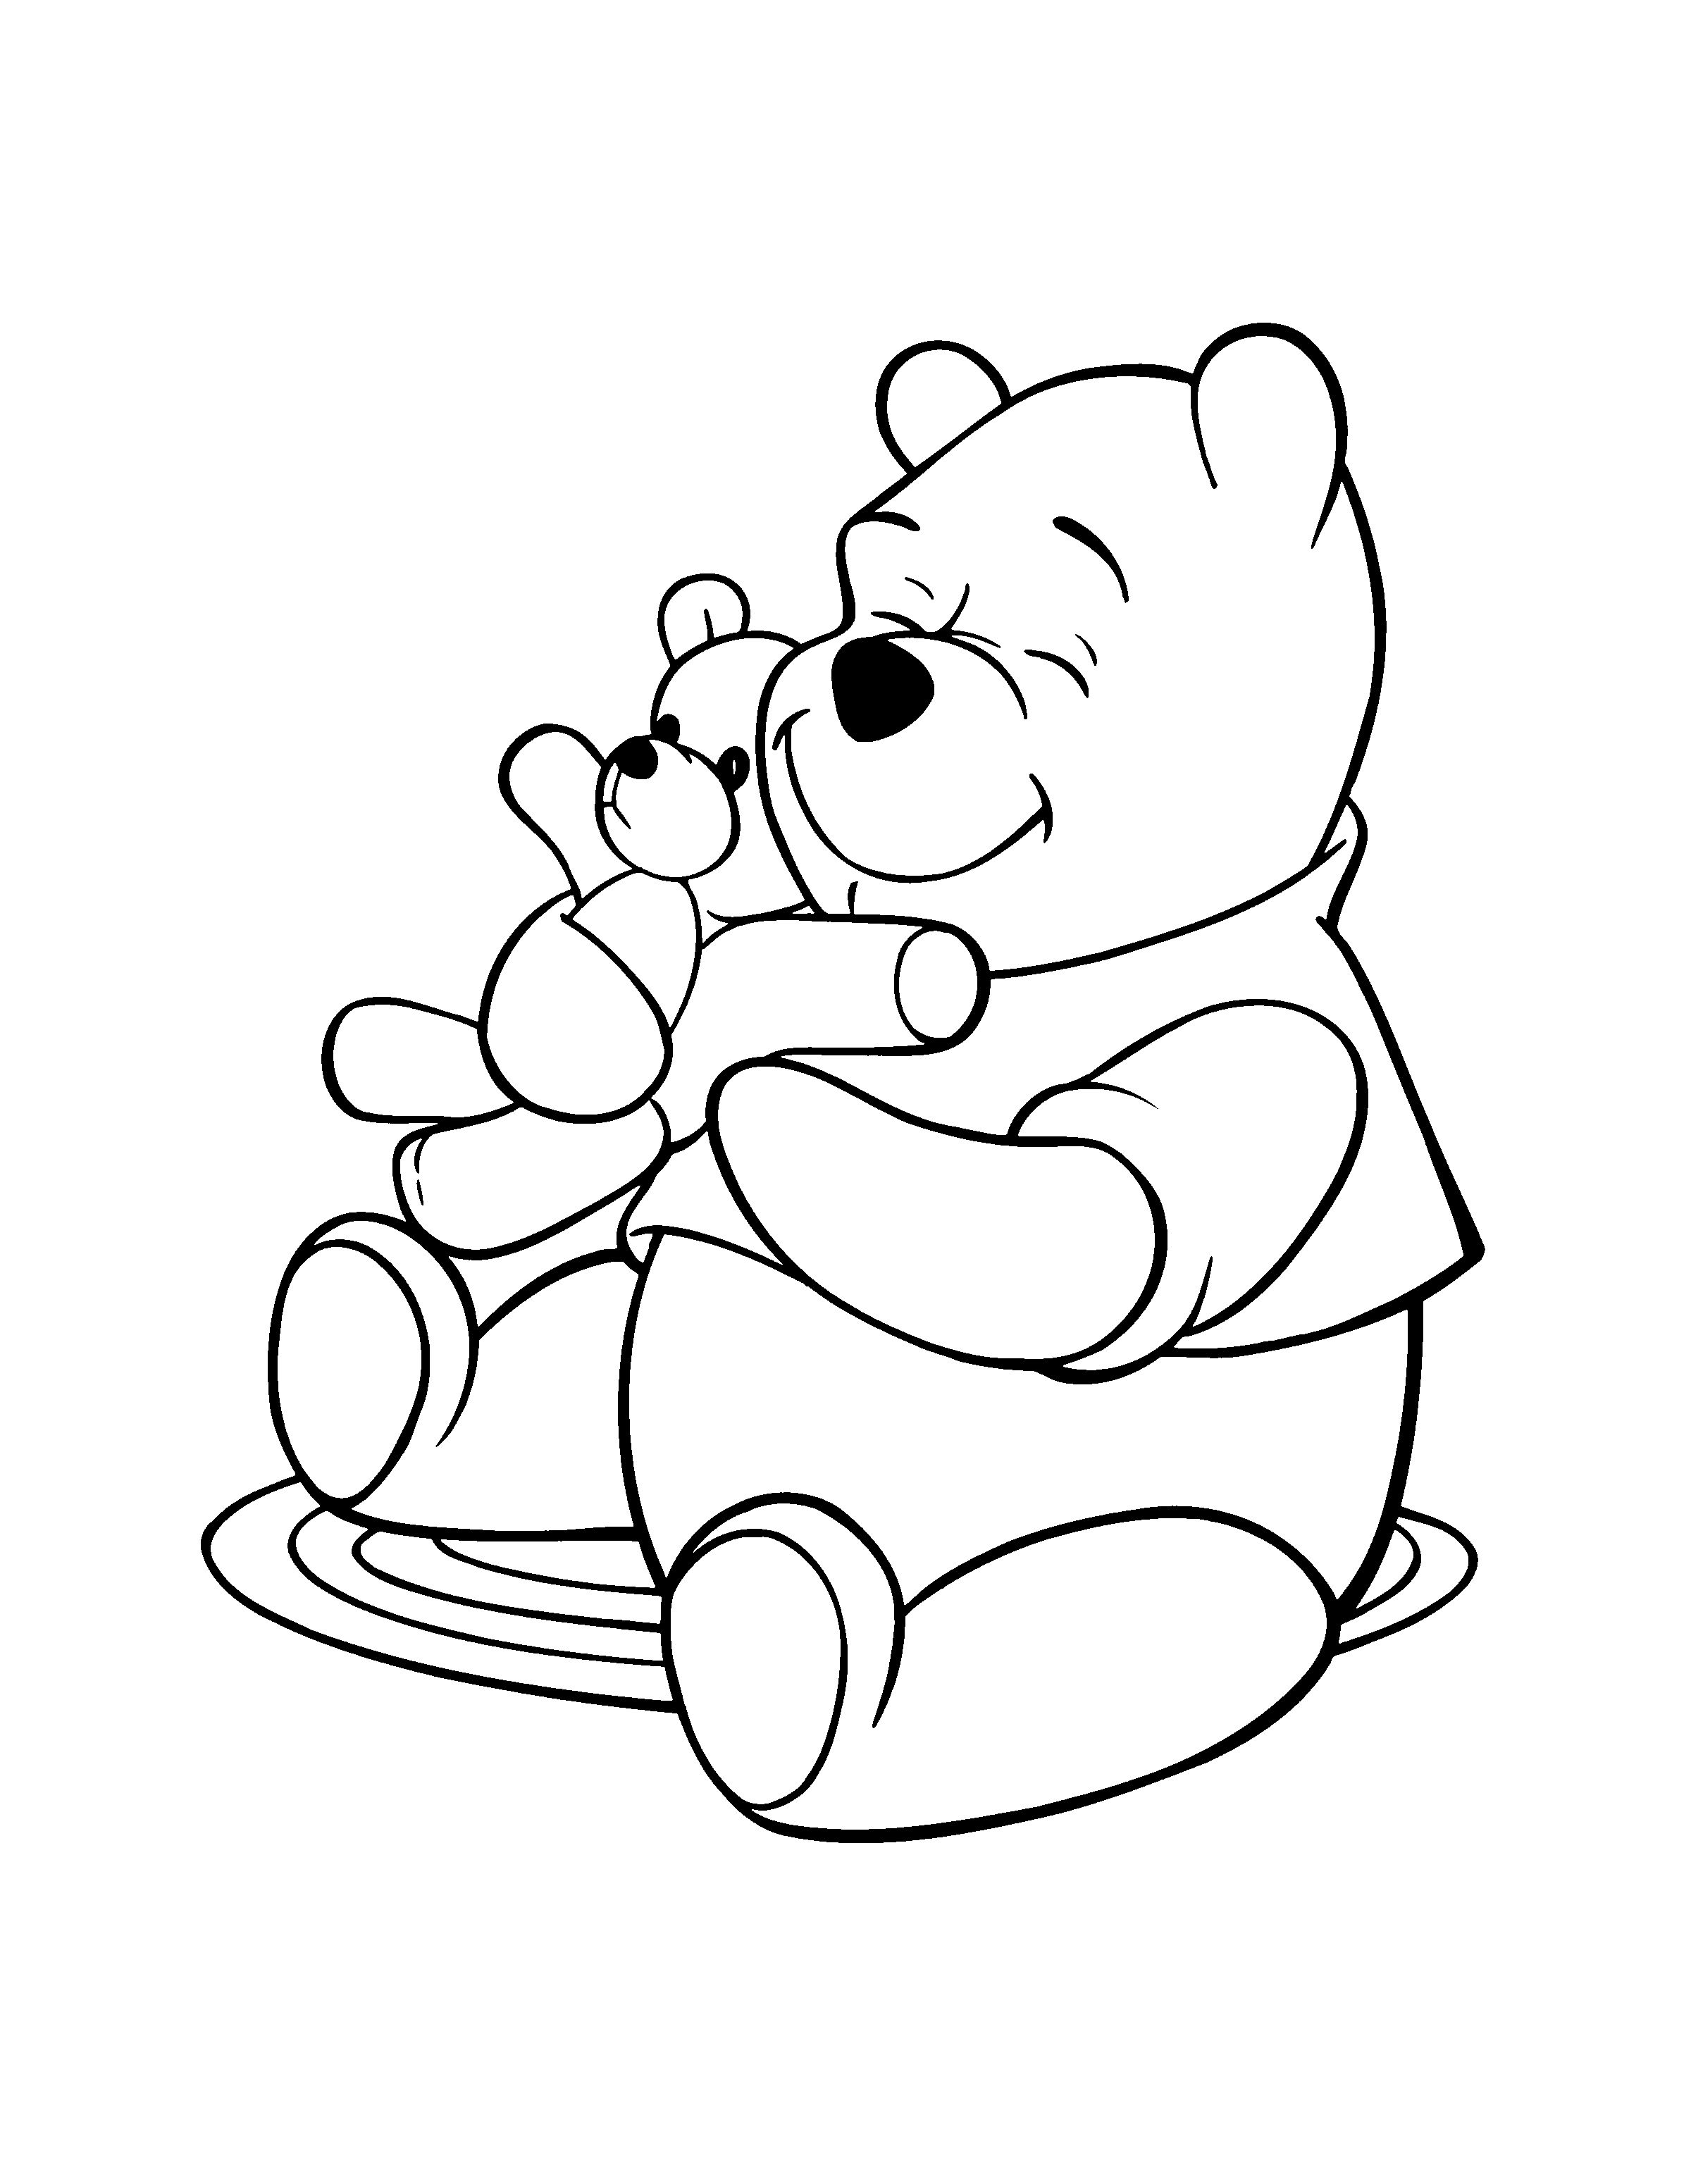 Coloring Page Winnie The Pooh Coloring Pages 80 Bear Coloring Pages Disney Coloring P